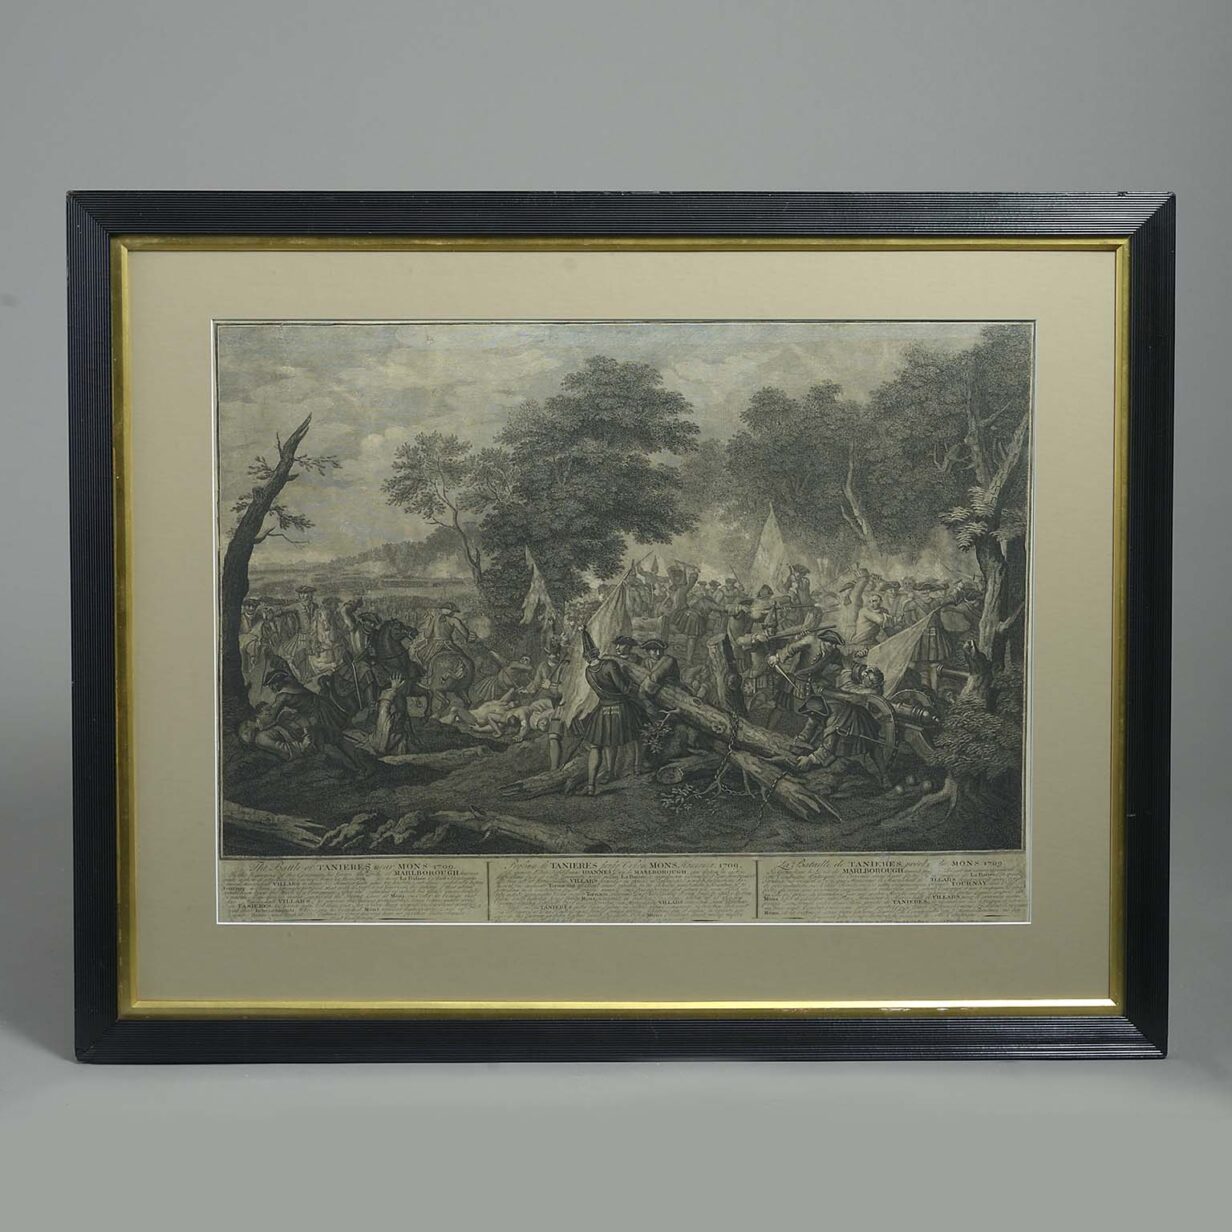 Six large 18th century engravings depicting the battle of blenheim